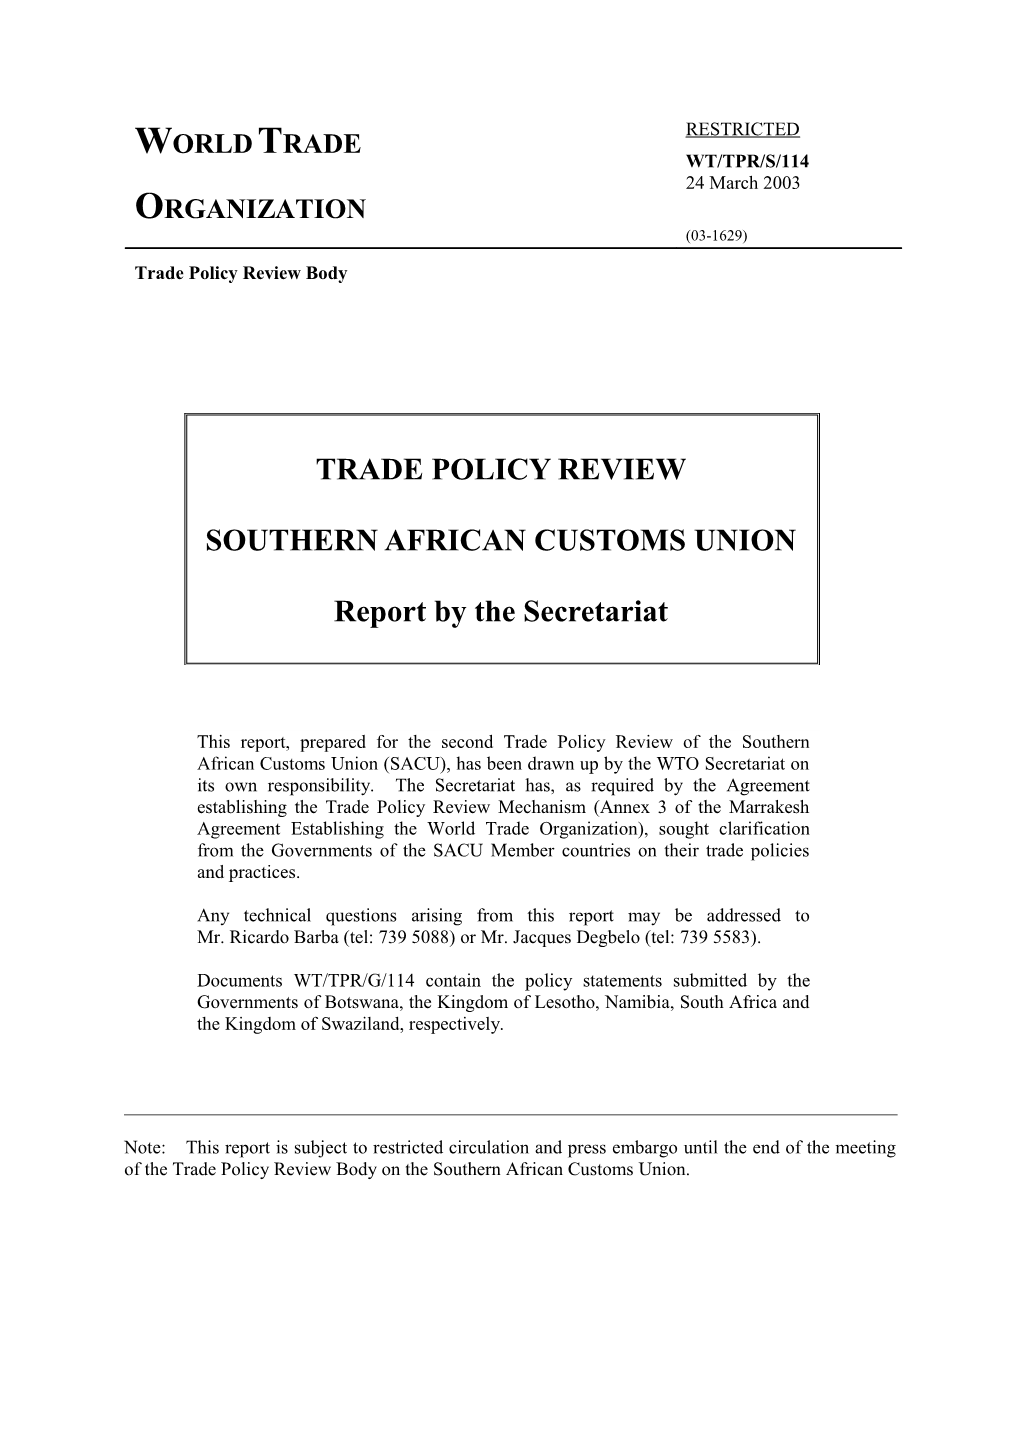 Trade Policy Review Body s5